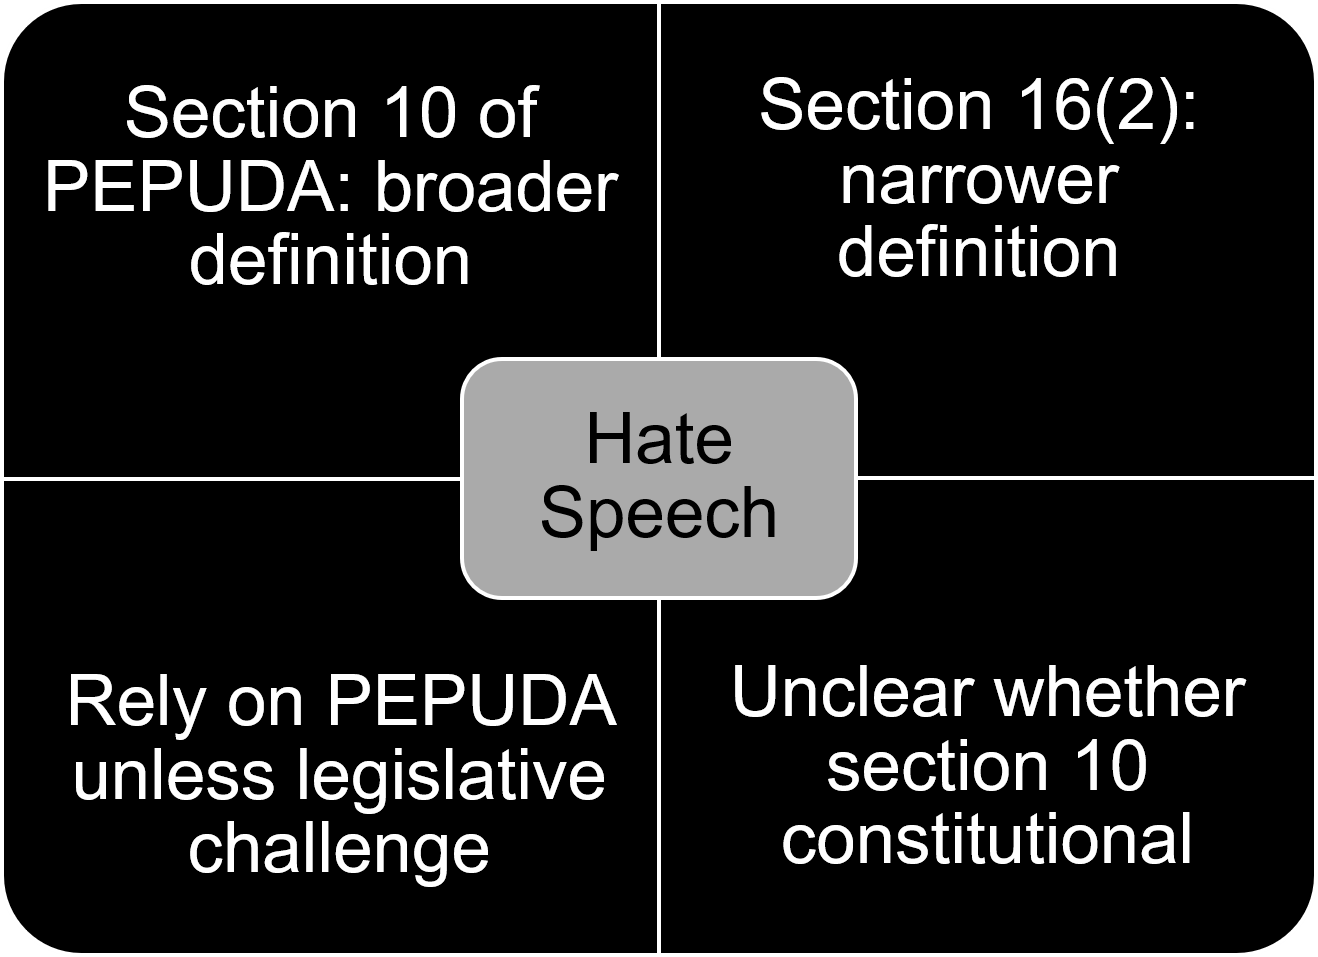 The following diagram summarises the aims of the chapter namely: the two sources for the definition of hate speech, when to rely on PEPUDA to challenge hate speech, and whether section 10 of PEPUDA is constitutional.The first point of the diagram notes that s10 of PEPUDA has a broader definition of hate speech.The second point of the diagram notes that s 16(2) of the constitution has a narrower definition of hate speech.The third point of the diagram states that one should rely on PEPUDA unless you are pursuing a legislative challenge, in other words, you are challenging PEPUDA itself.The fourth point of the diagram states that it is unclear whether section 10 of PEPUDA is constitutional.